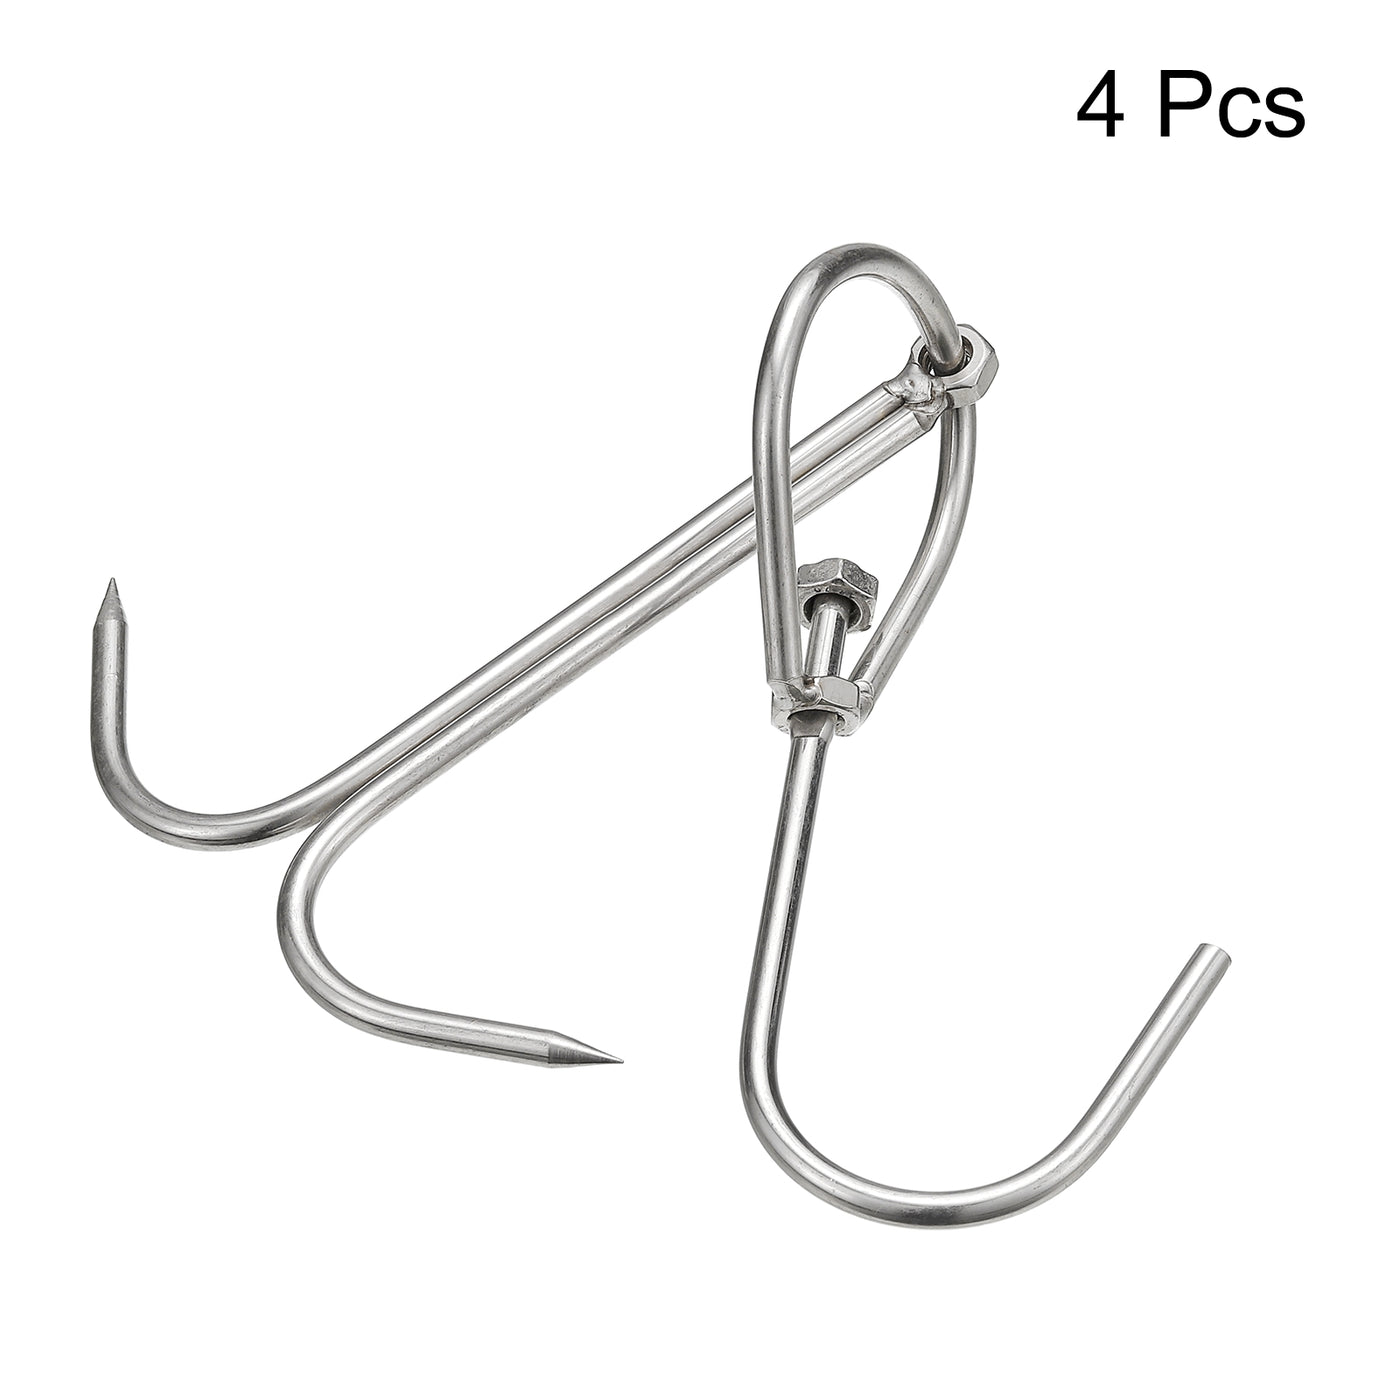 uxcell Uxcell Double Meat Hook Stainless Steel Smoker Hook Tools for Grill Cooking Fish Chicken